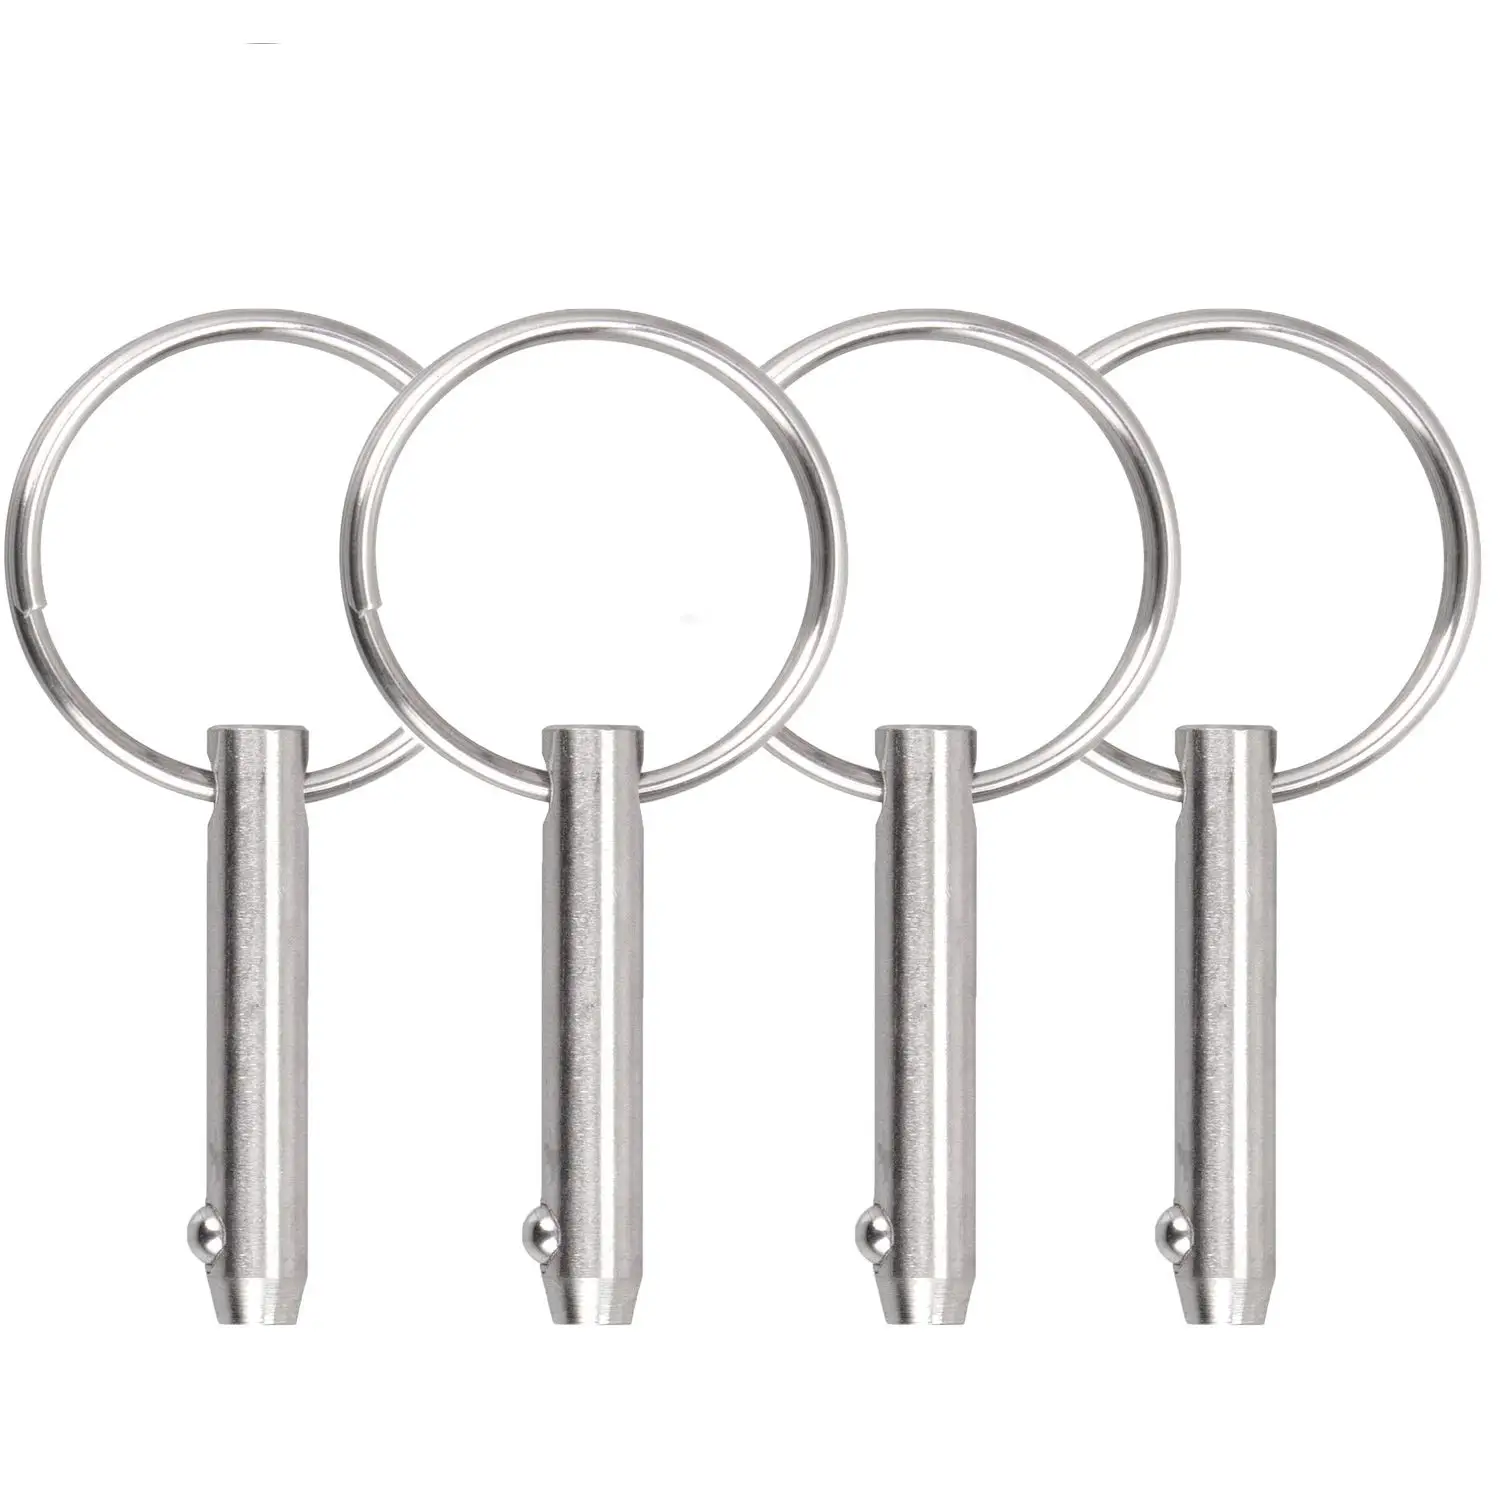 

Quick Release Pins 6.3mmX51mm, Bimini Top Pins Diameter 0.25 Inch/6.3mm, Total Length 2 Inch/51mm, 316 Stainless Steel (4 Packs)